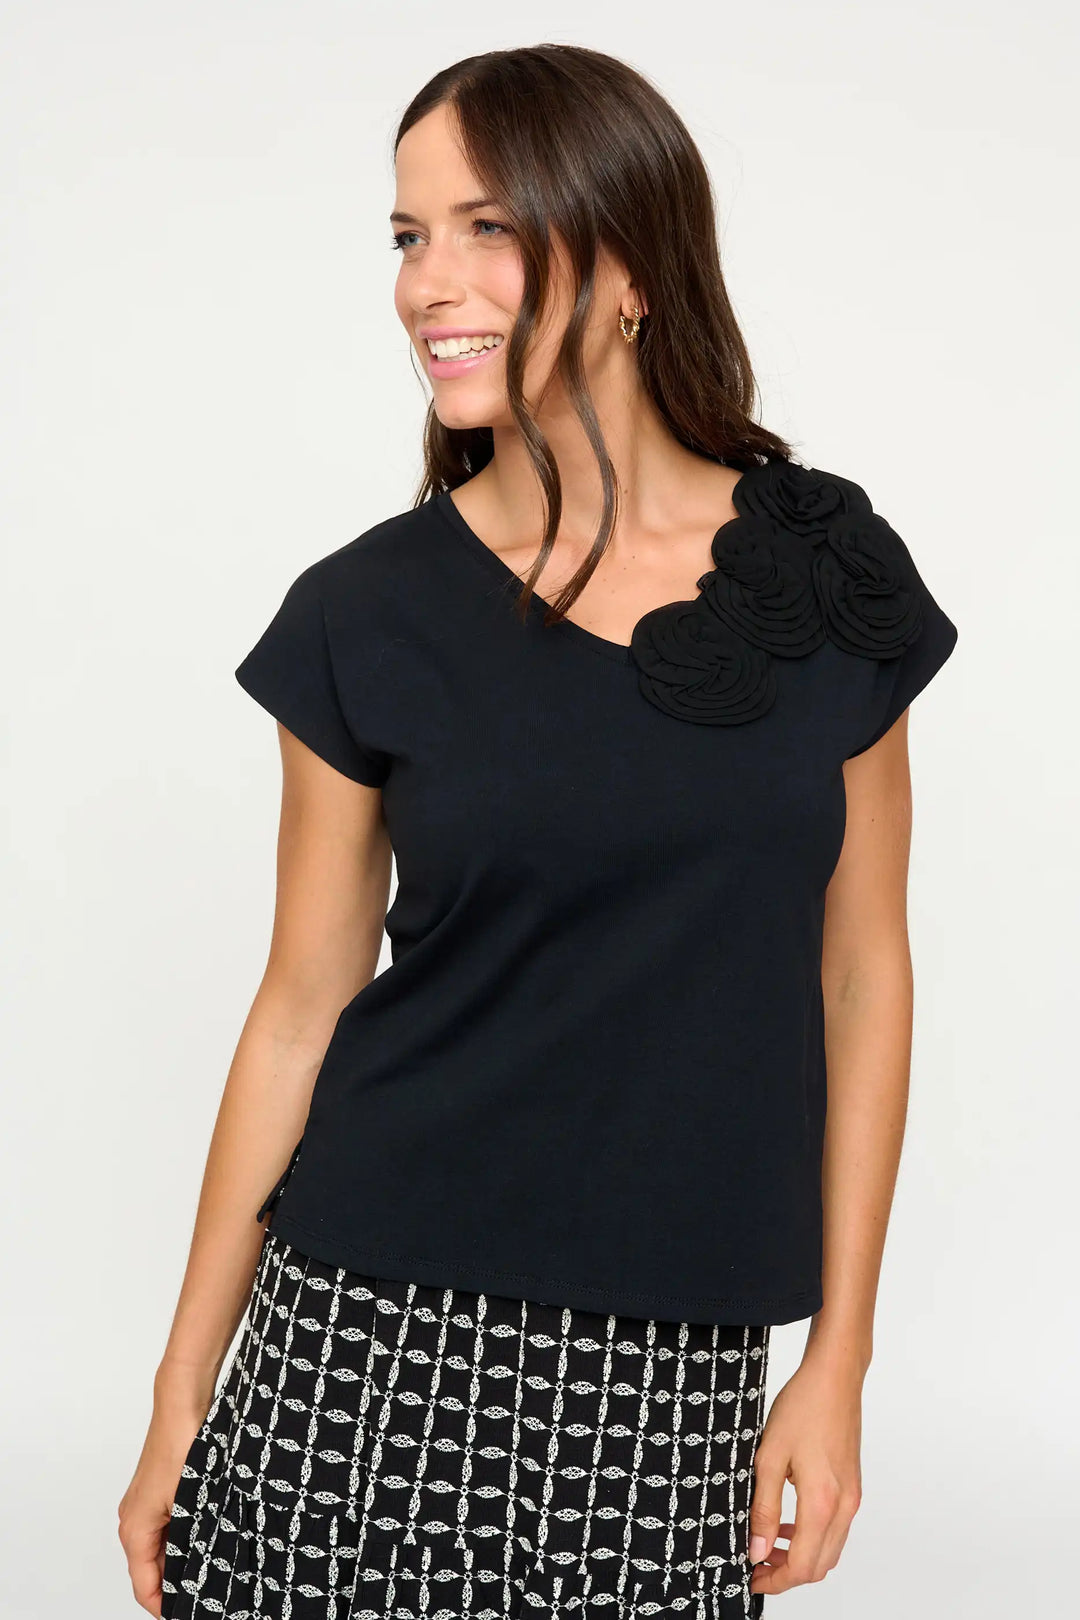 Smiling model in the 'Hinojales' style black top with distinctive floral appliqué on one shoulder, paired with a patterned skirt.